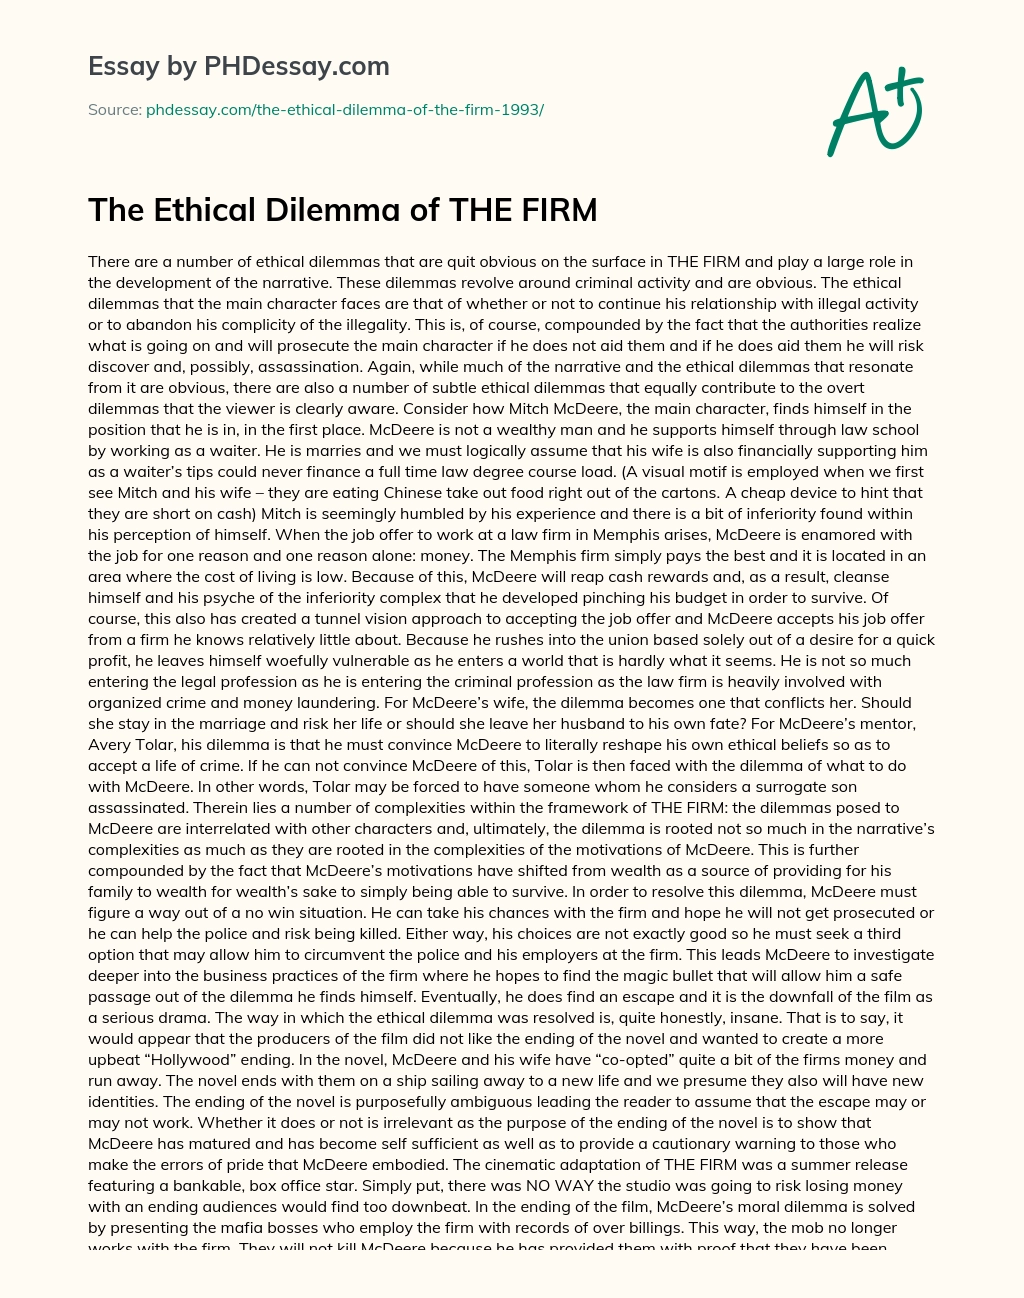 The Ethical Dilemma of THE FIRM essay